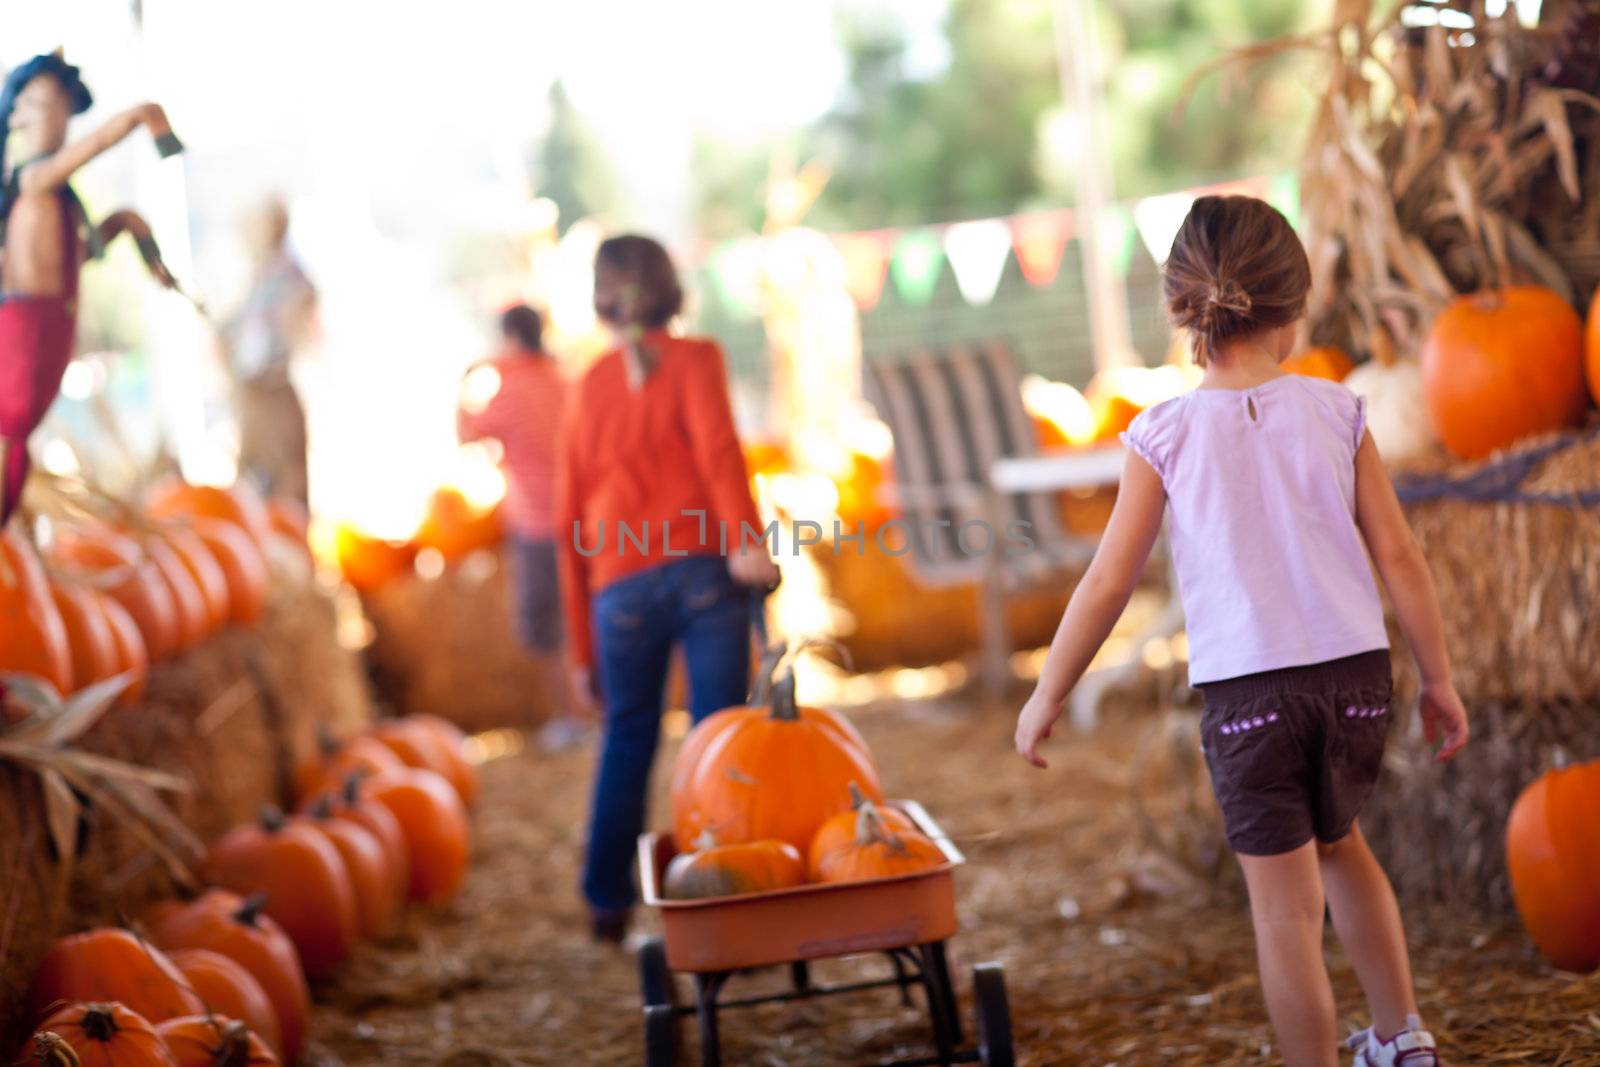 Cute Little Girls Pulling Their Pumpkins In A Wagon by Feverpitched